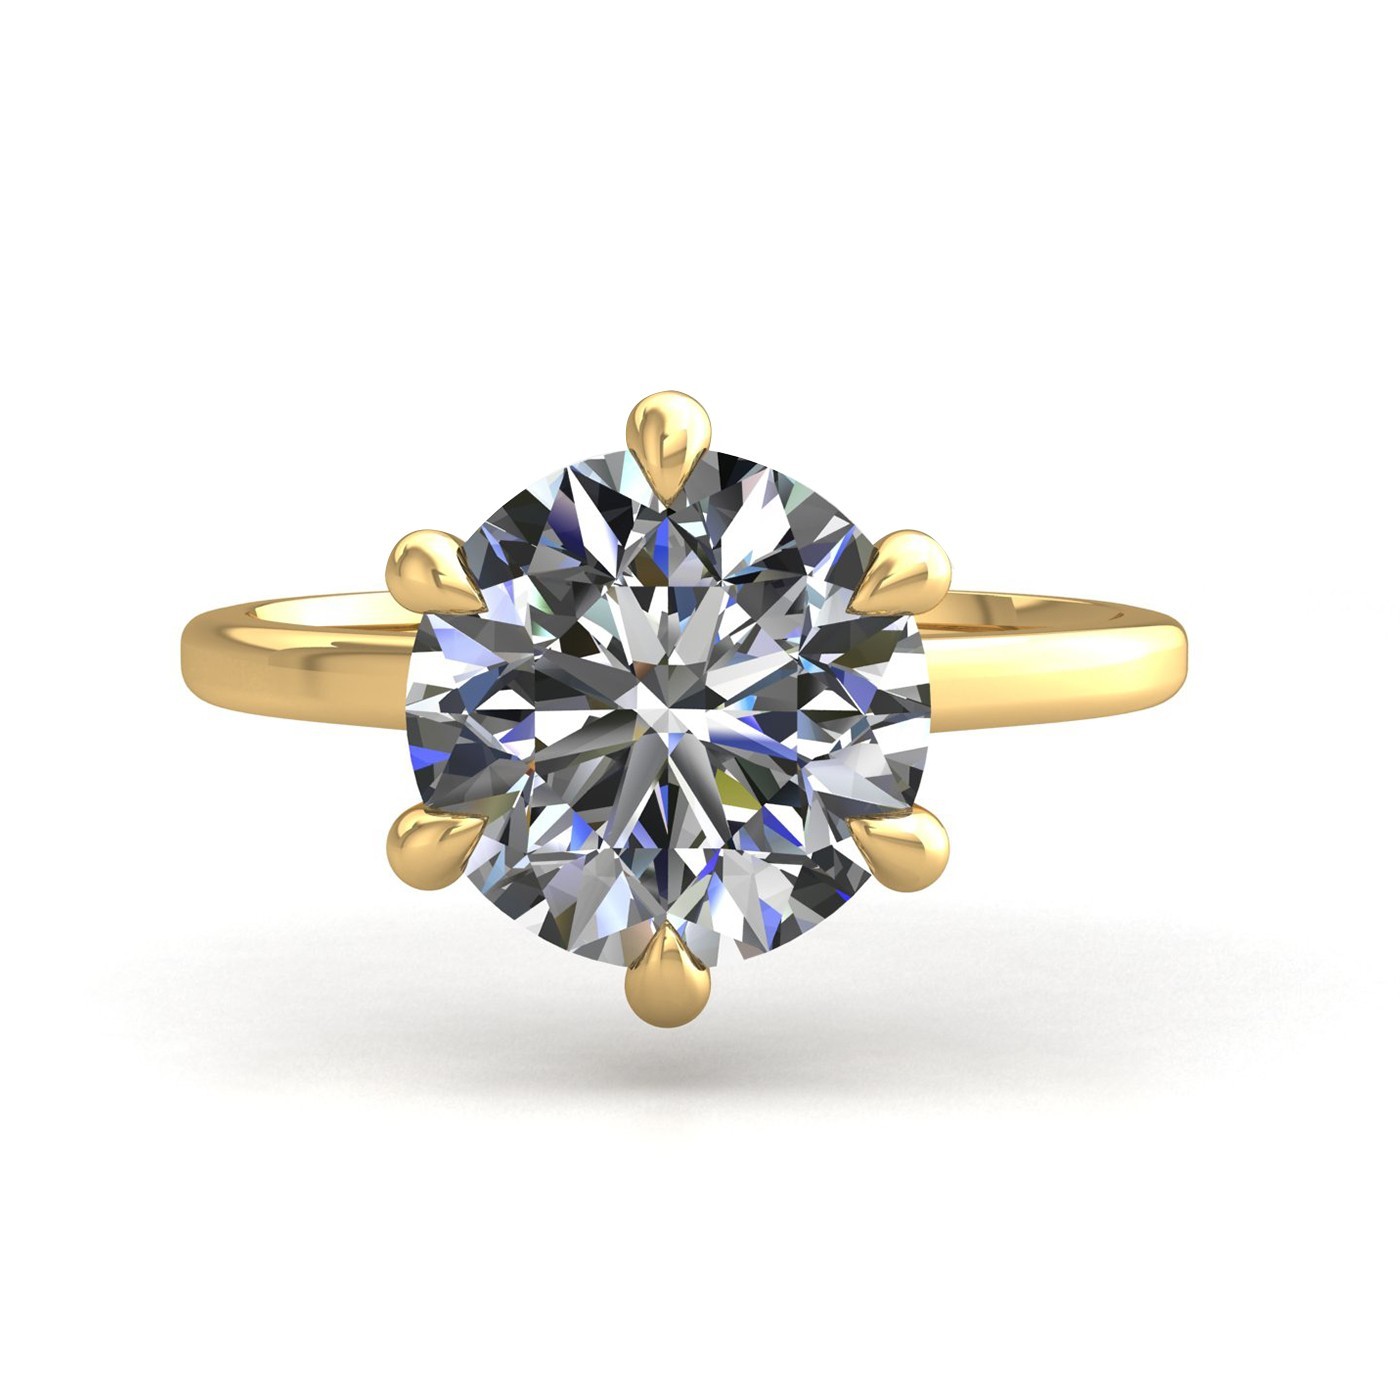 18k yellow gold 2,50 ct 6 prongs solitaire round cut diamond engagement ring with whisper thin band